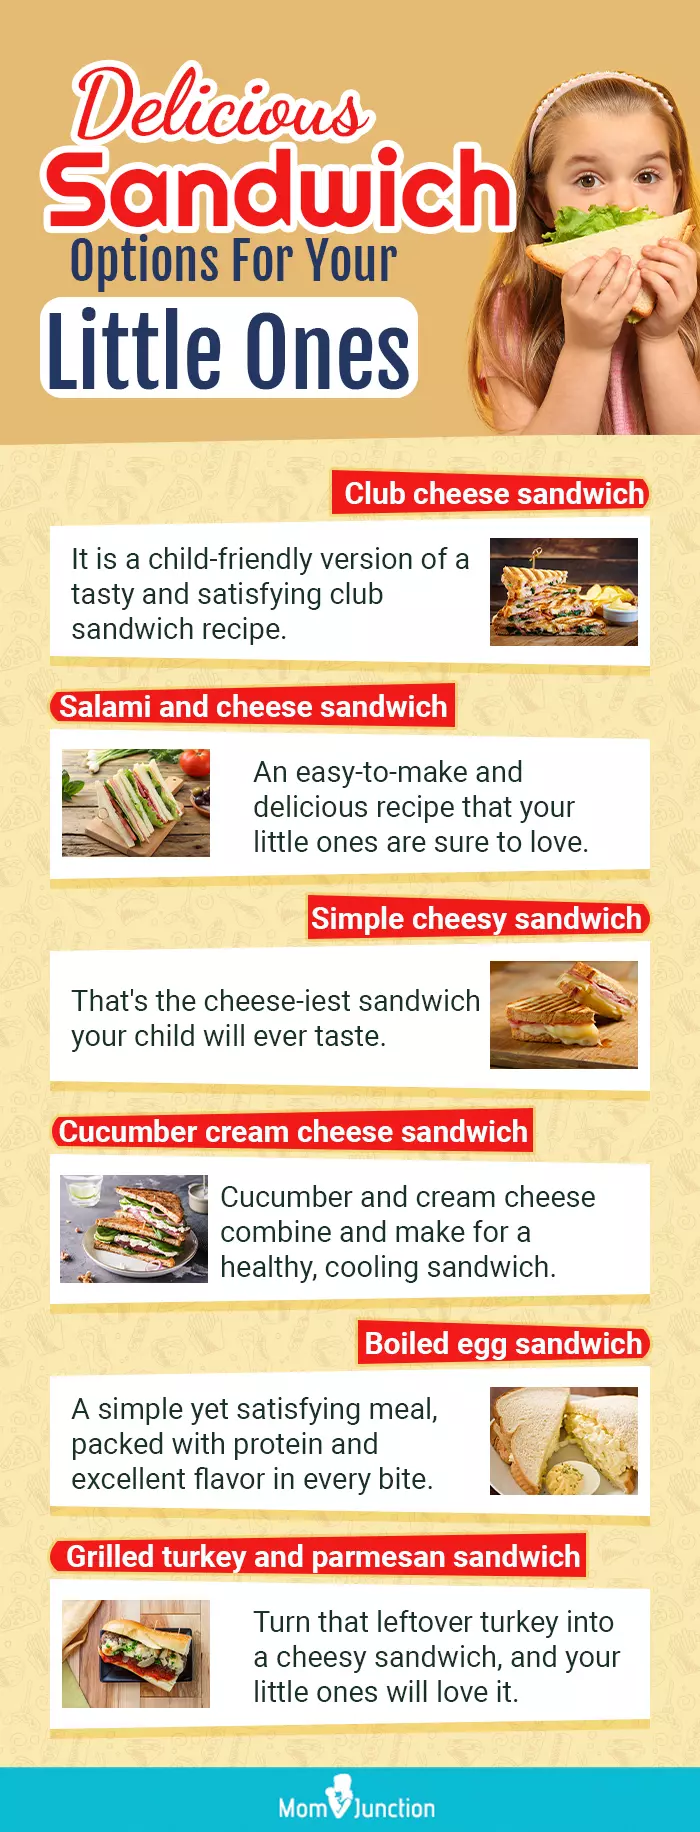 delicious sandwich options for your little ones (infographic)